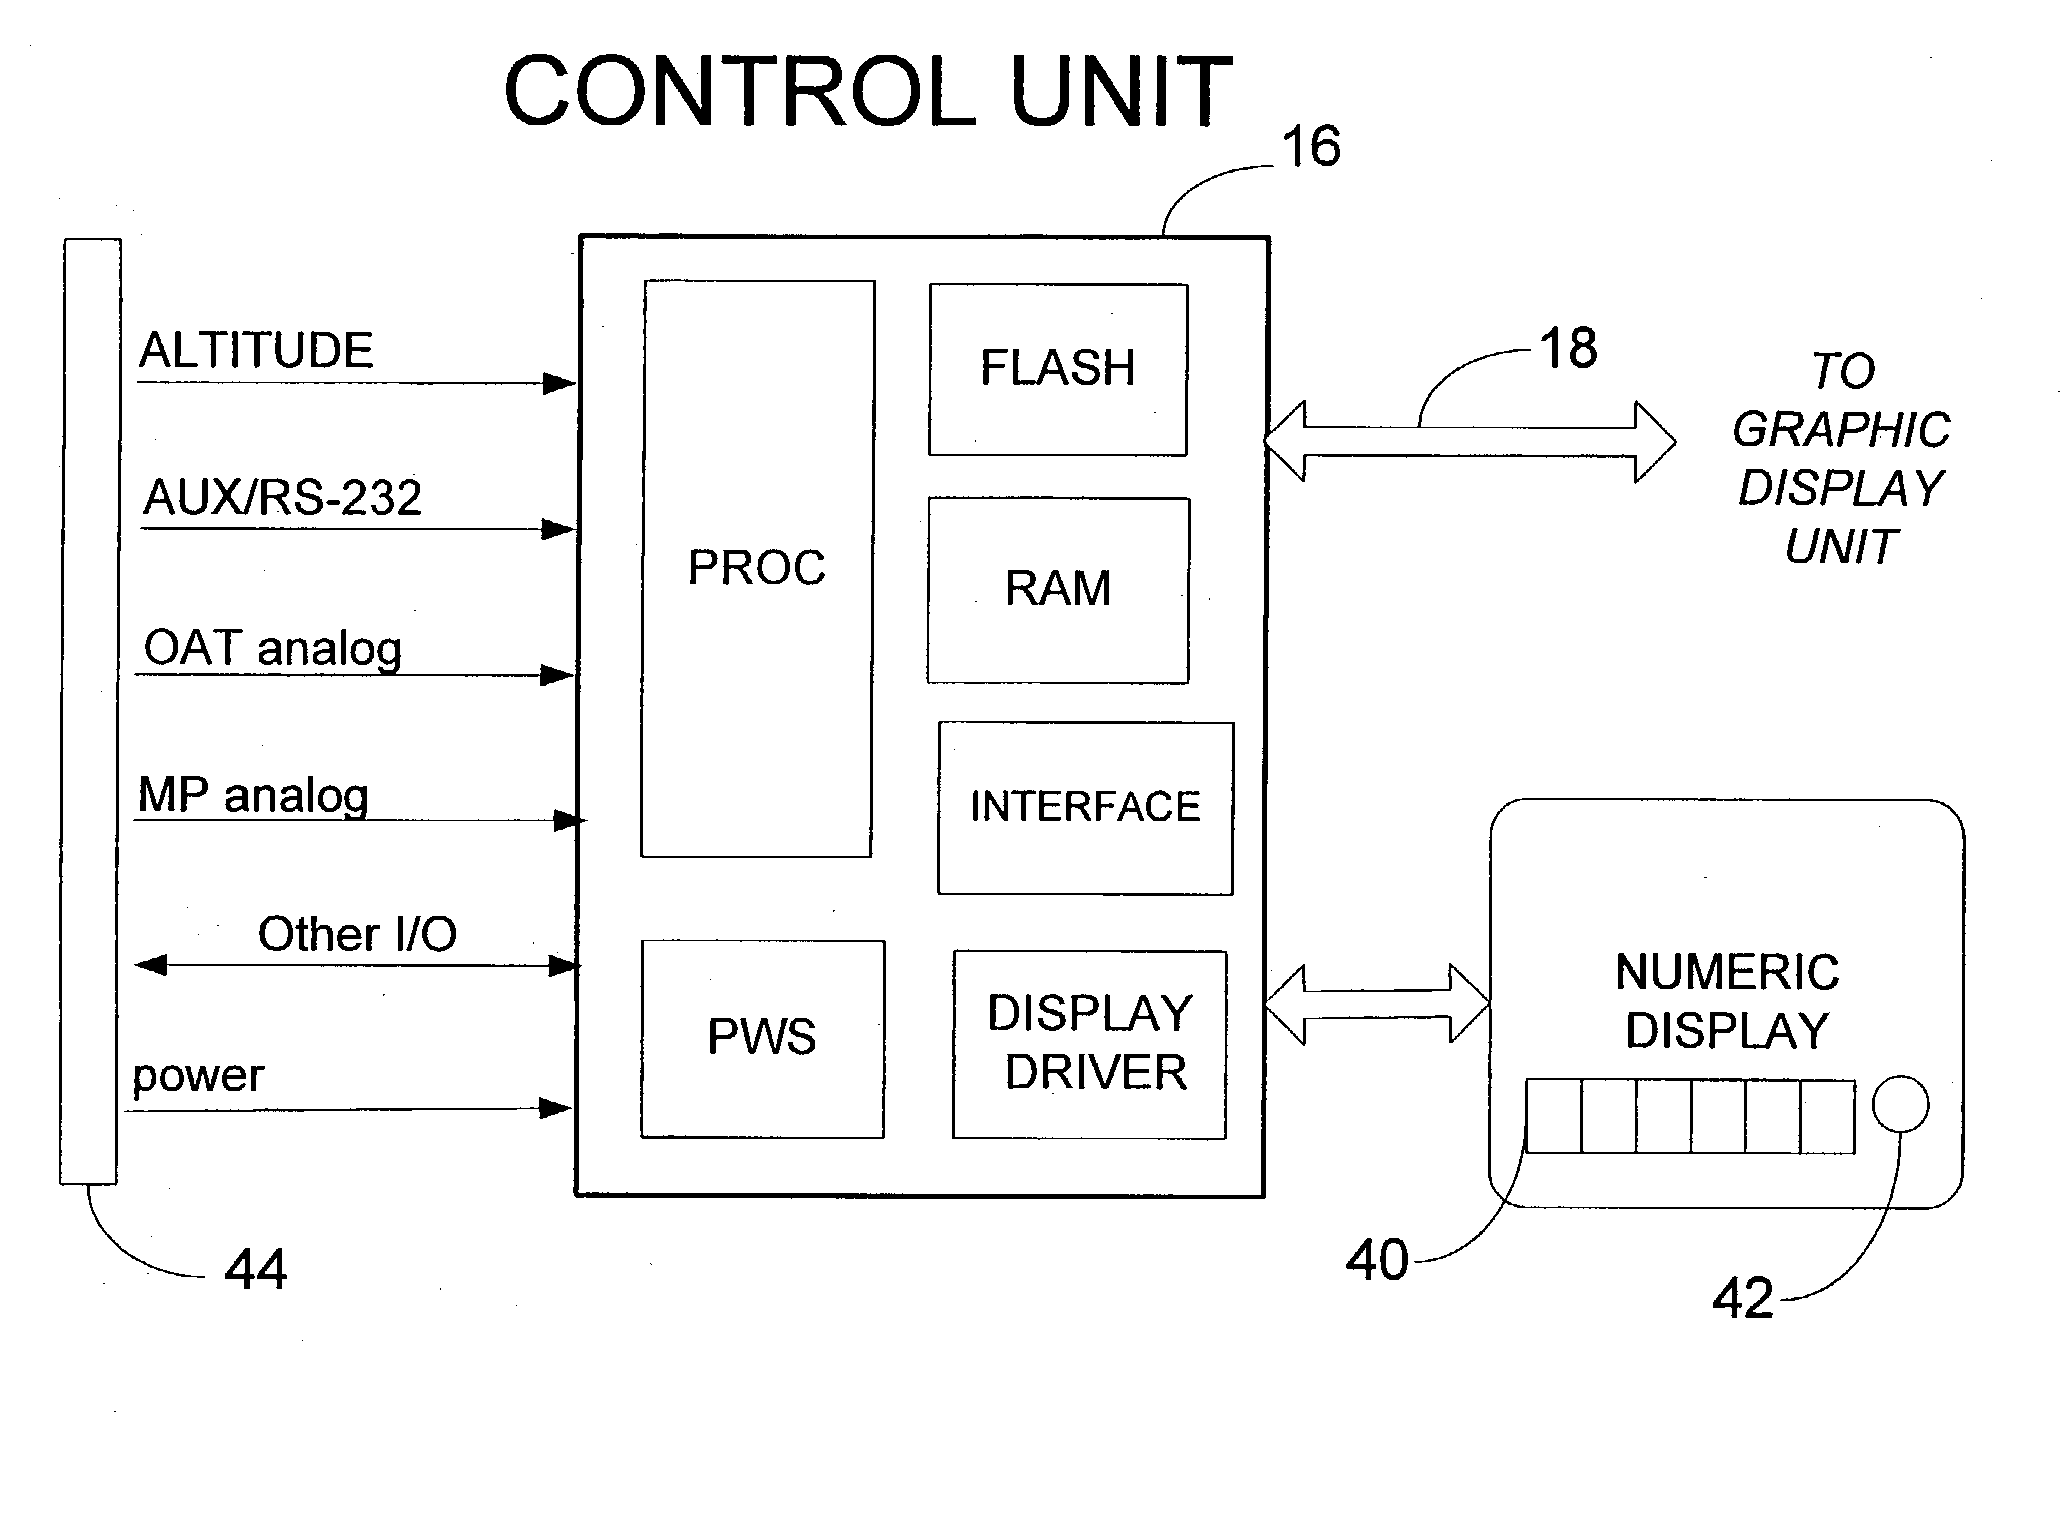 Power available and limitation indicator for use with an aircraft engine